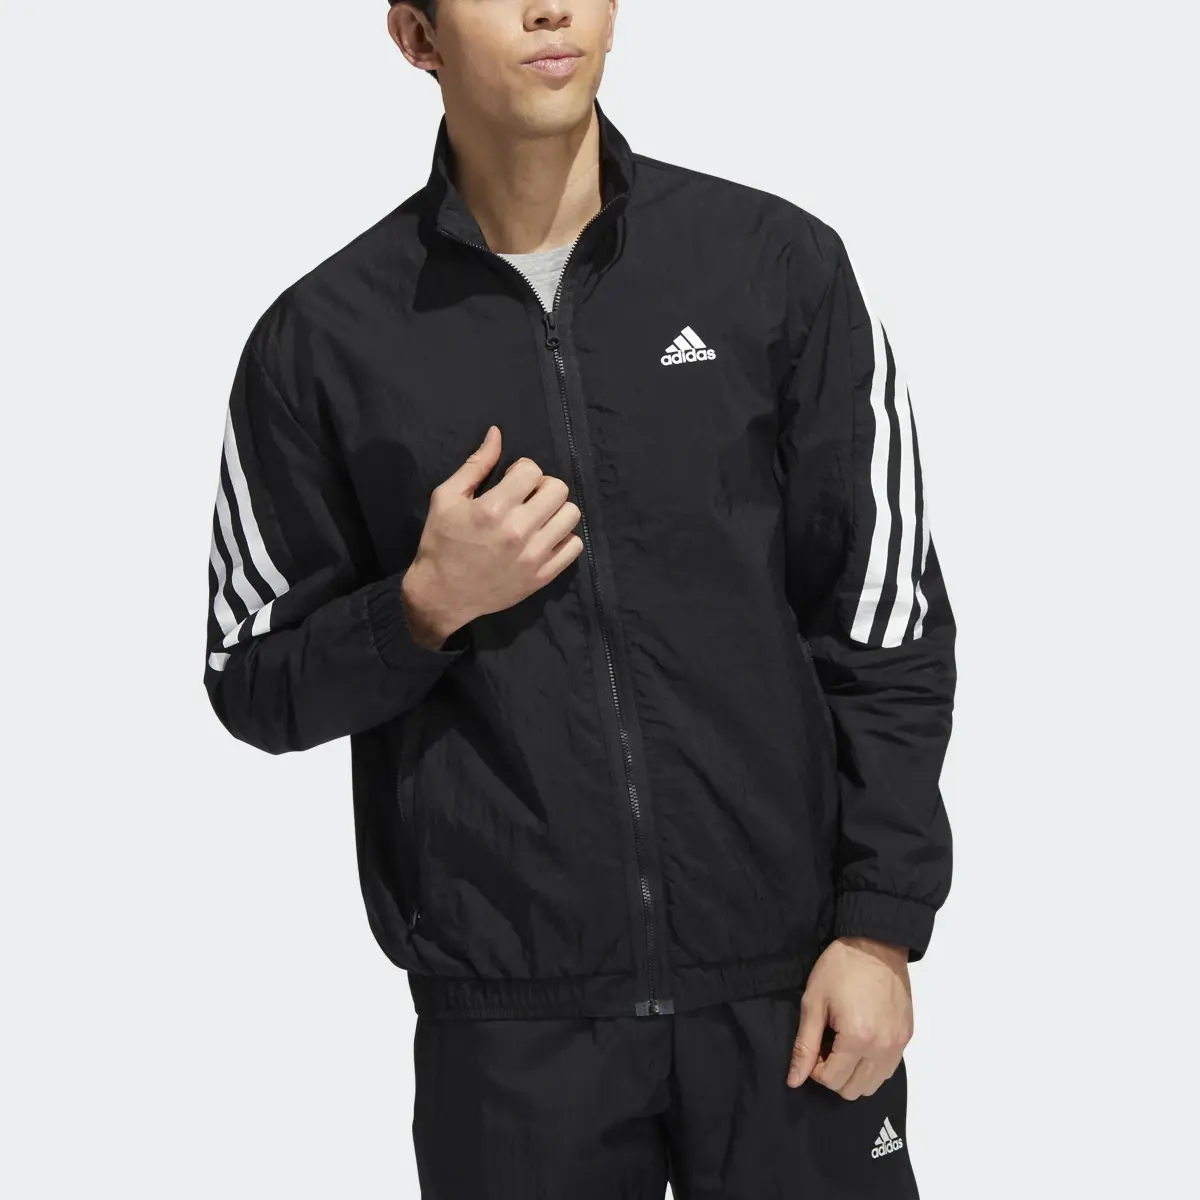 Adidas Future Icons 3-Stripes Woven Track Top. 1